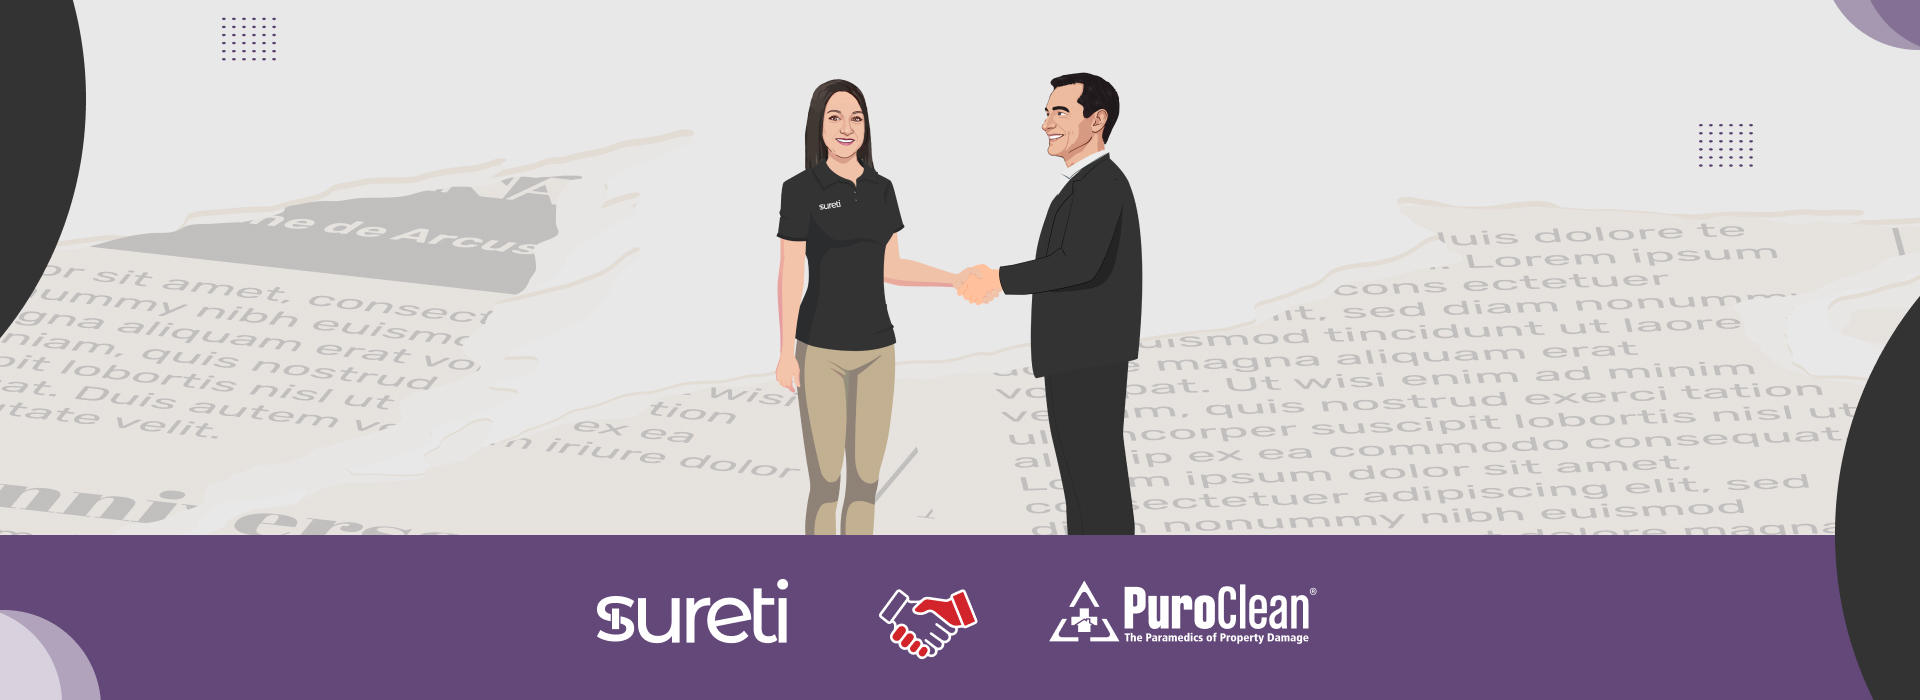 sureti and PuroClean Join Forces to Expedite Property Claims Payments